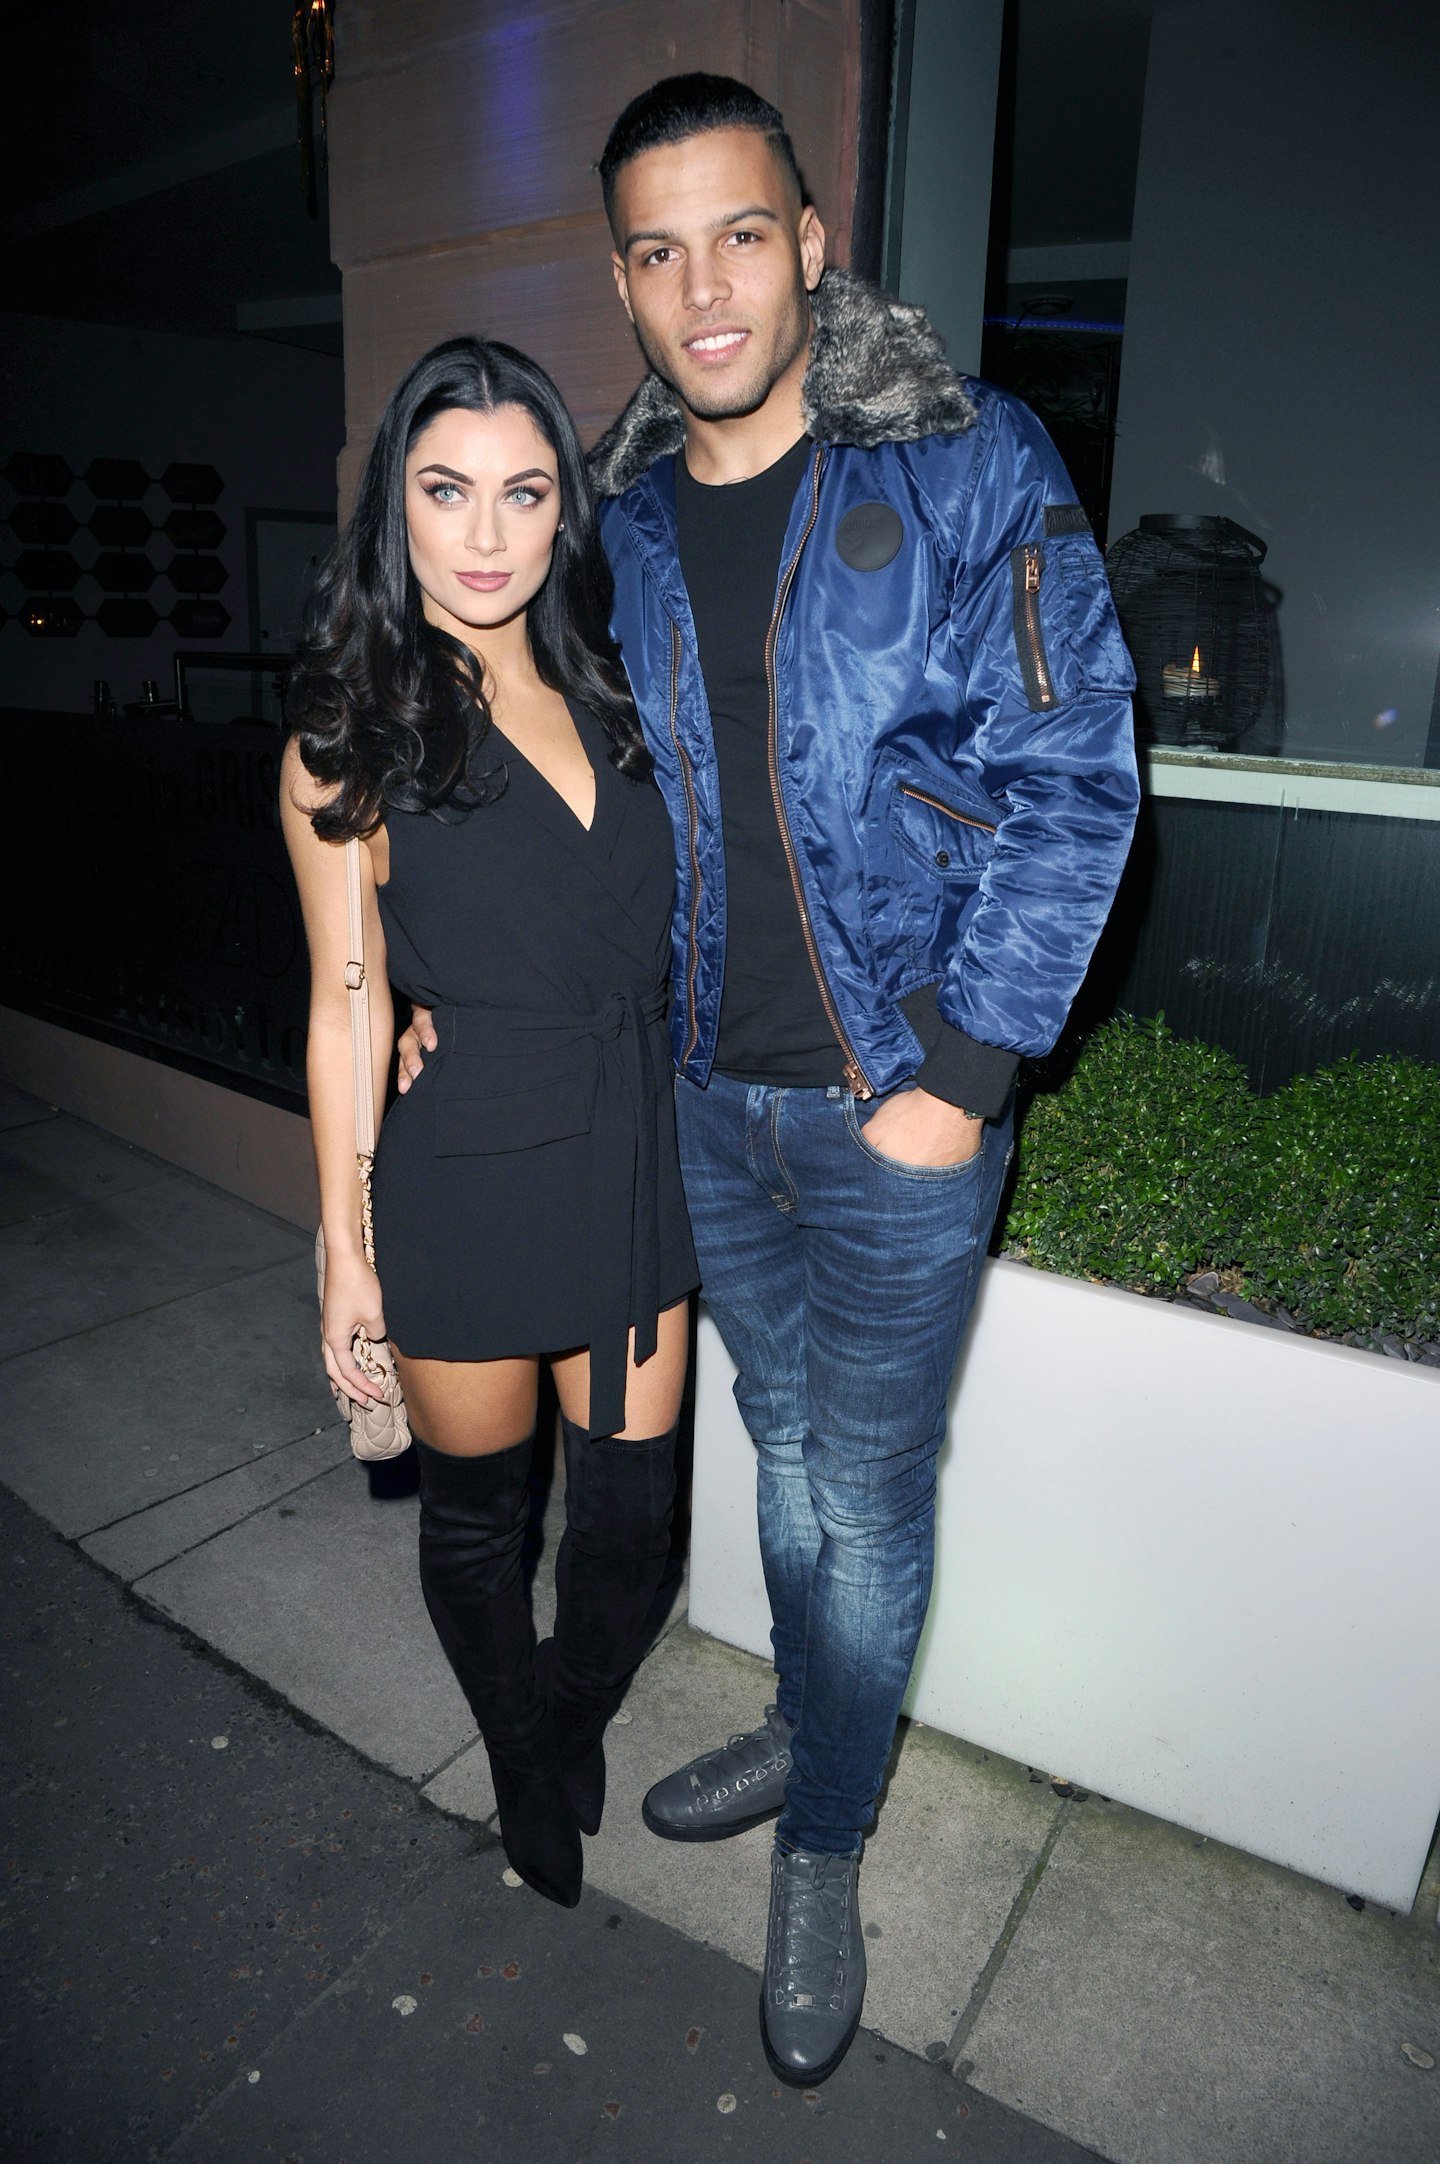 Cally Jane Beech and Luis Morrison